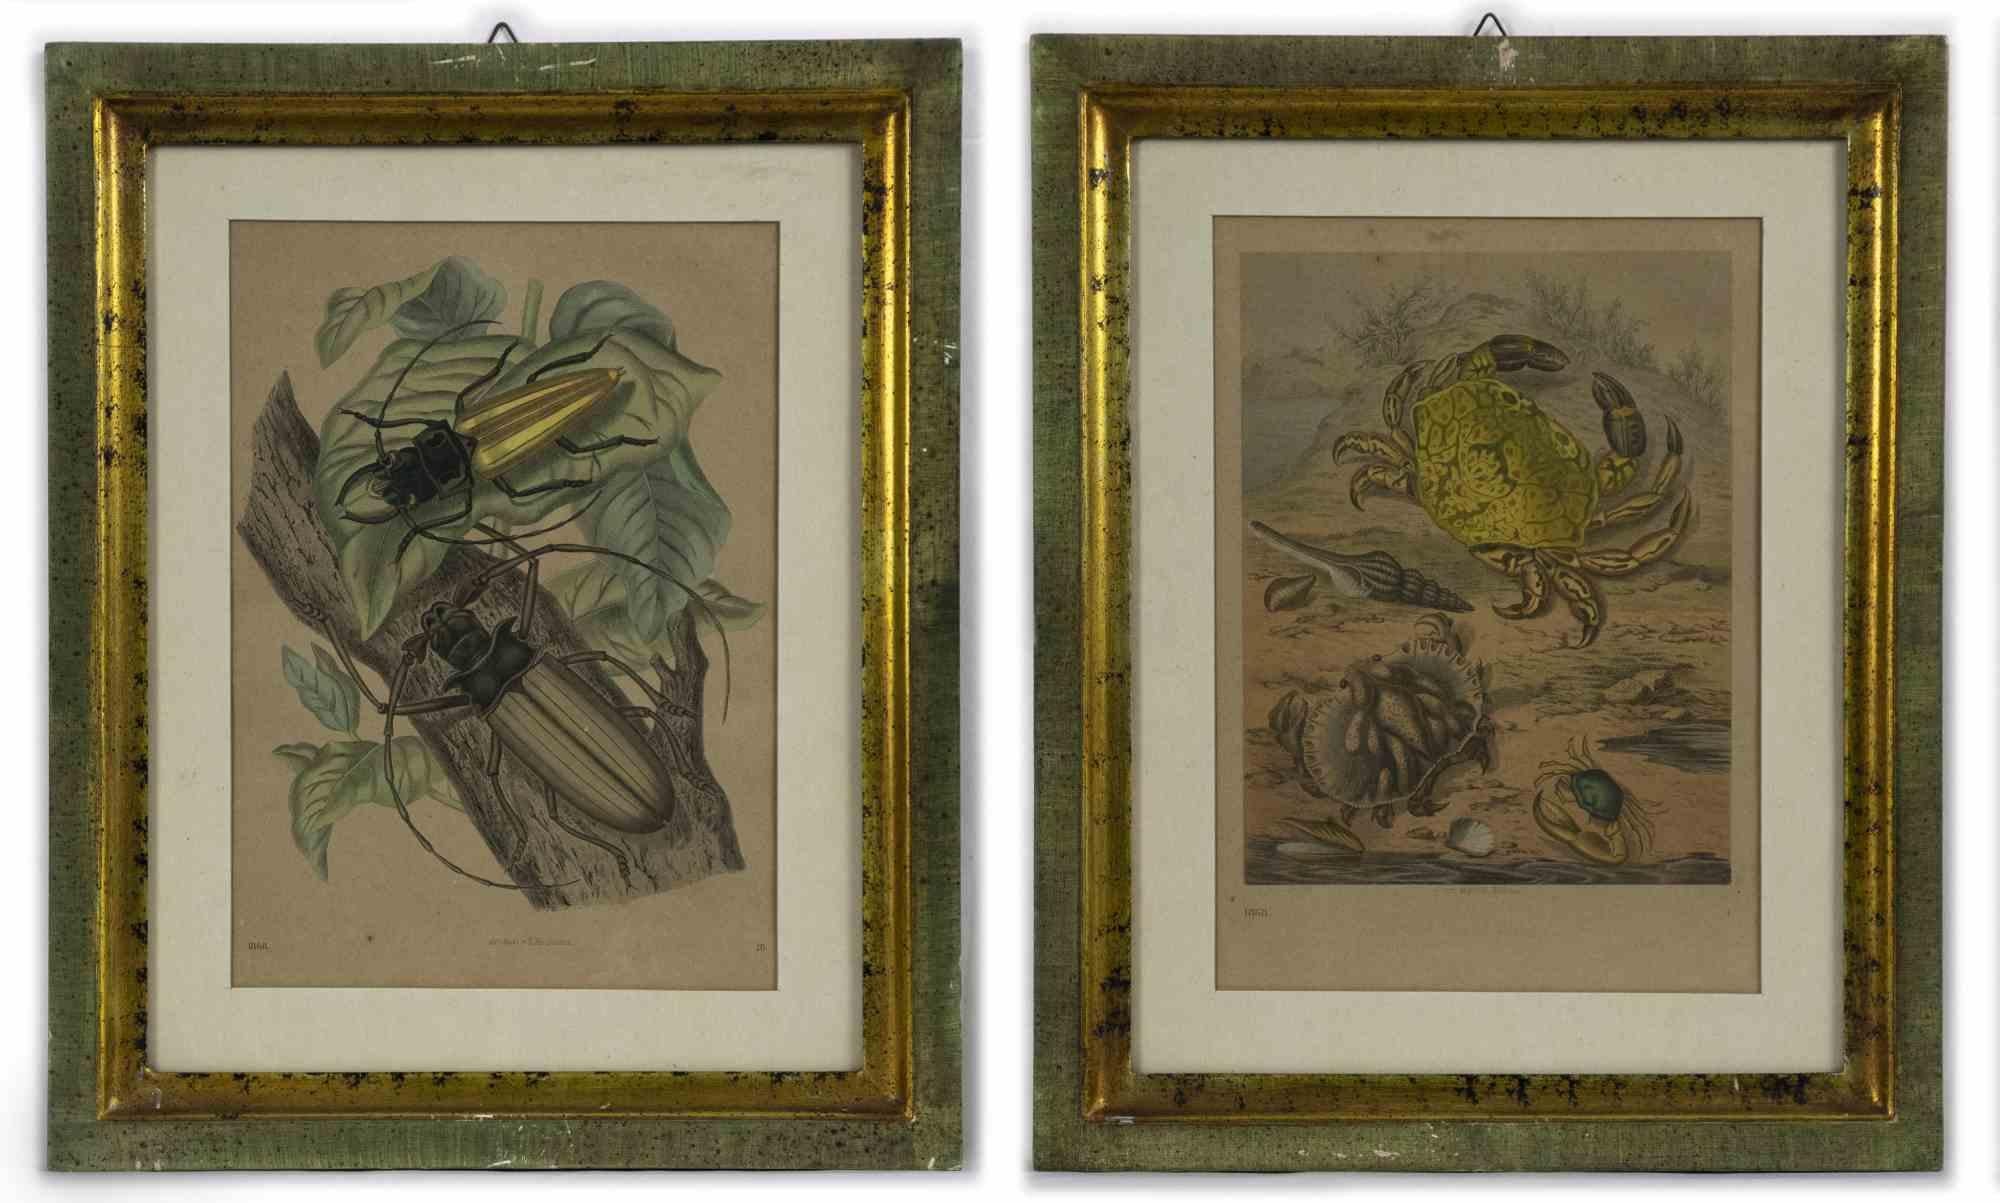 Insects - Pair of Original Lithographs by Emil Hochdanz- 1868